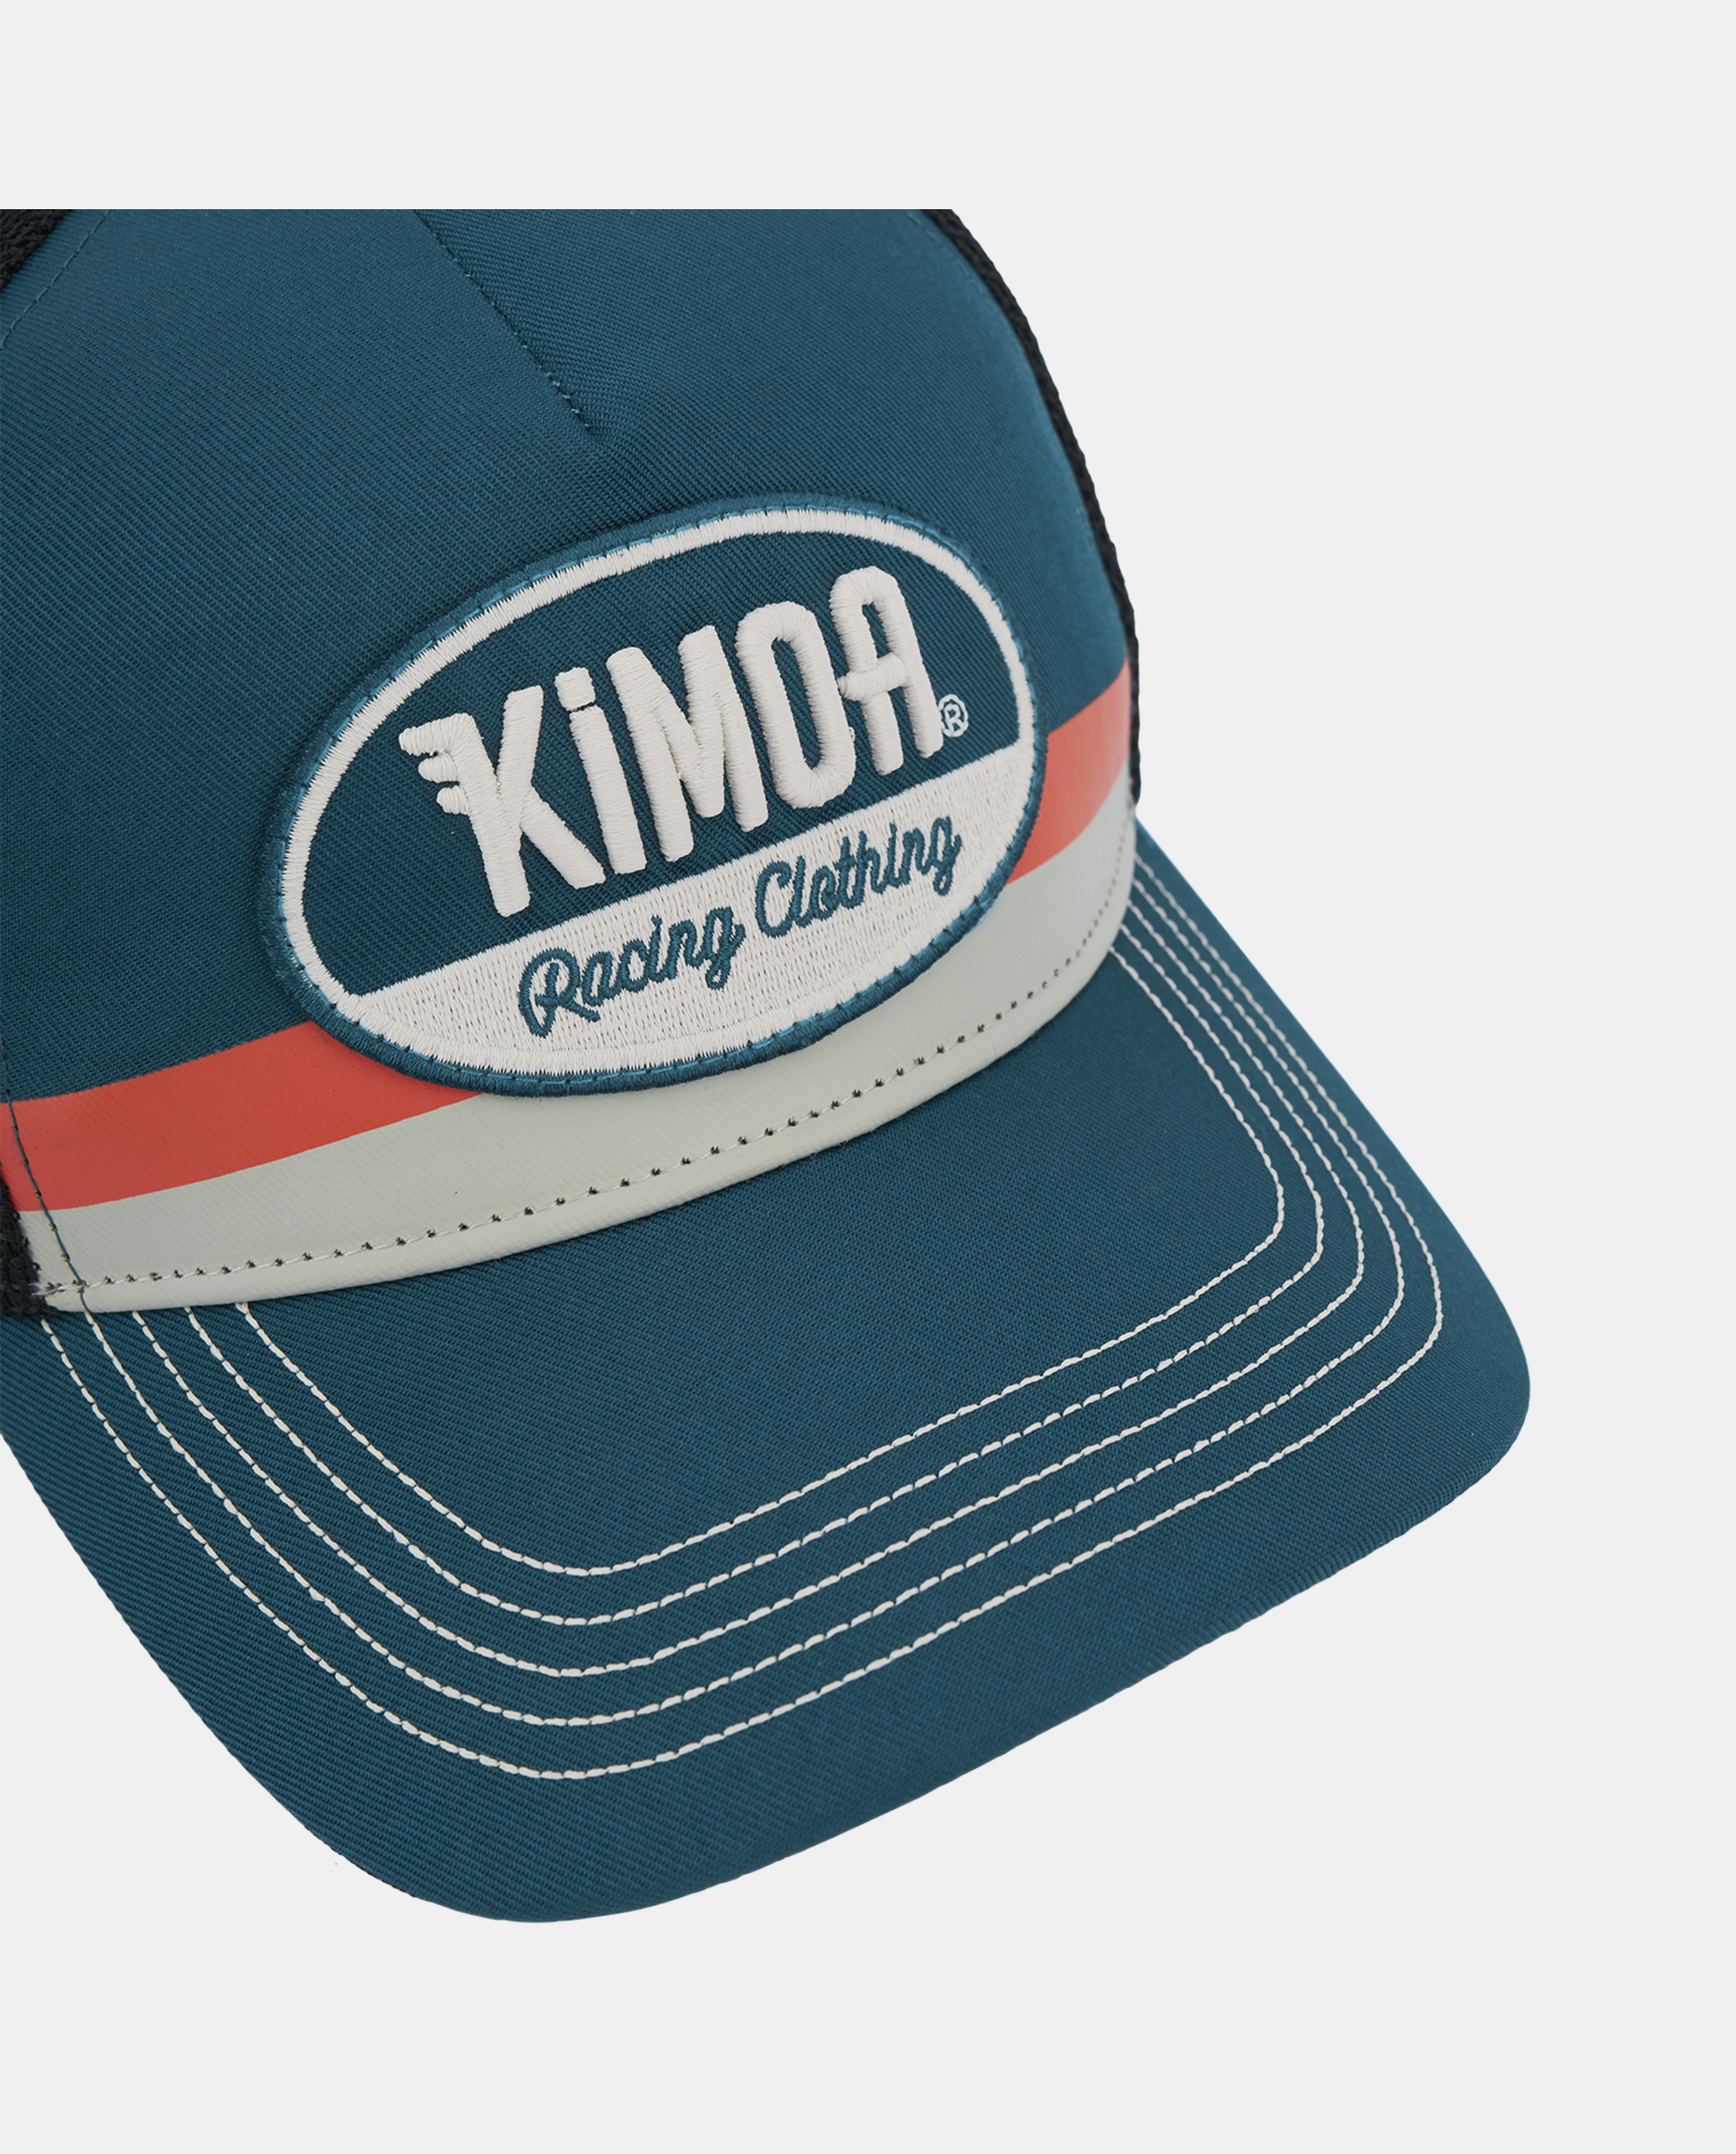 Powered by Kimoa Red Cap